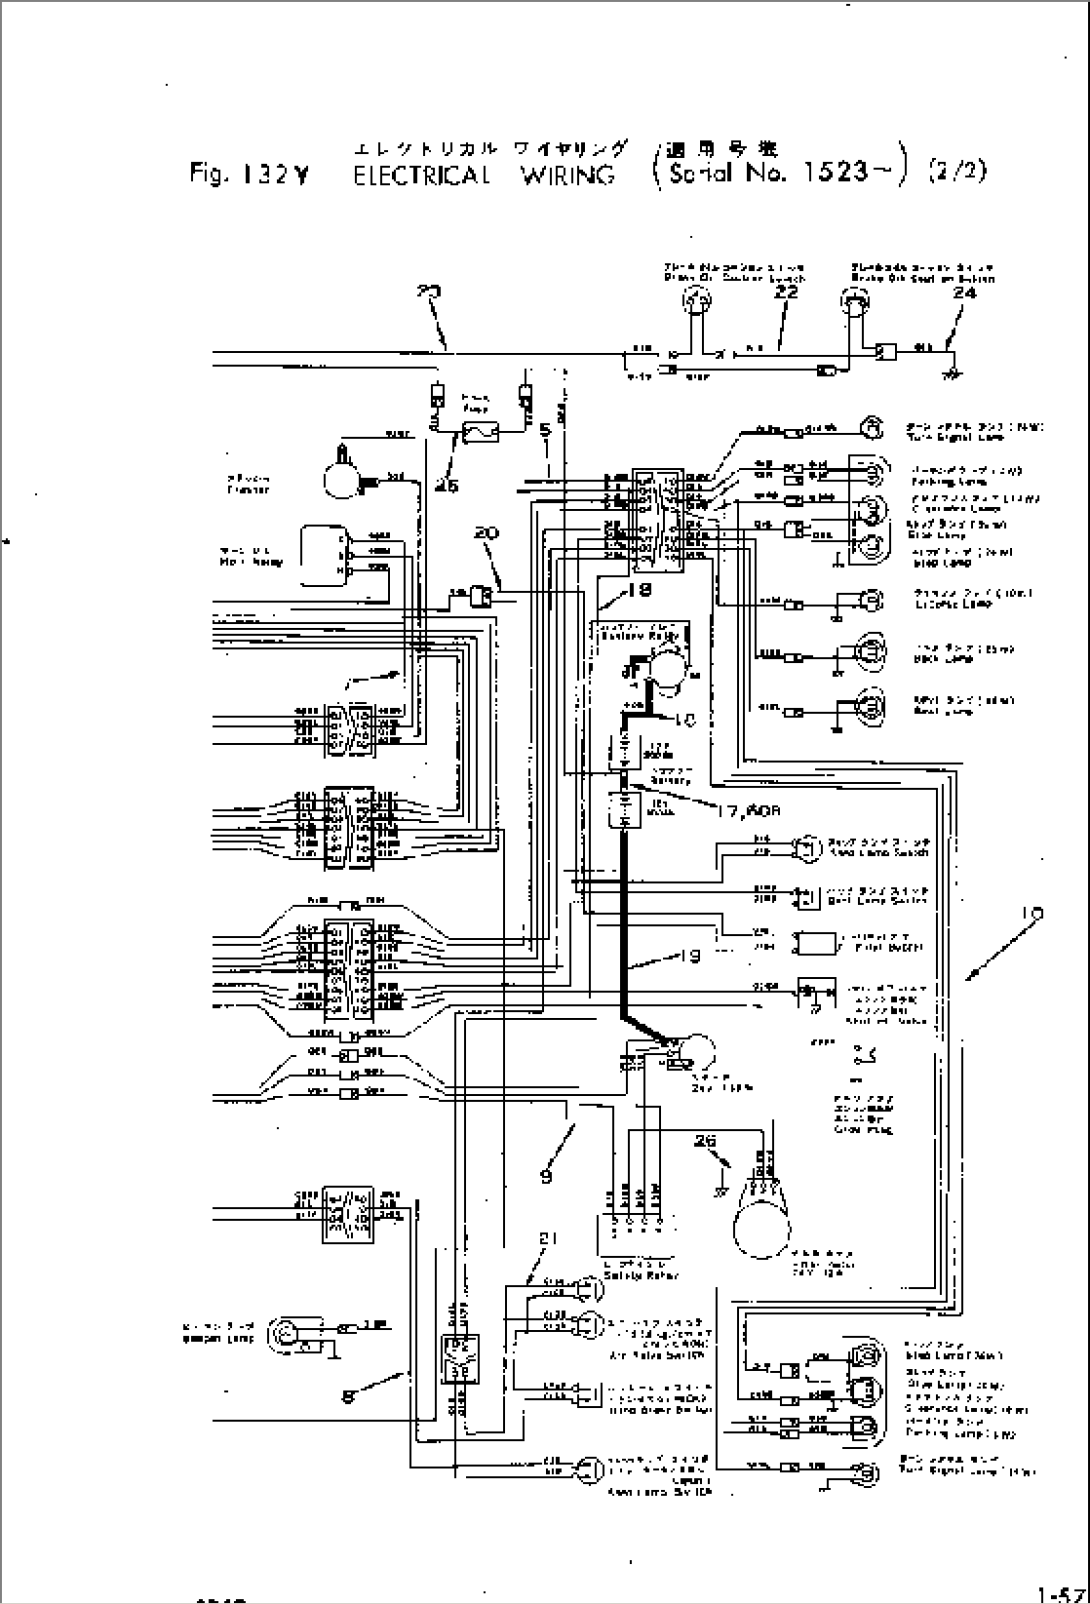 ELECTRICAL WIRING (2/2)(#1523-)